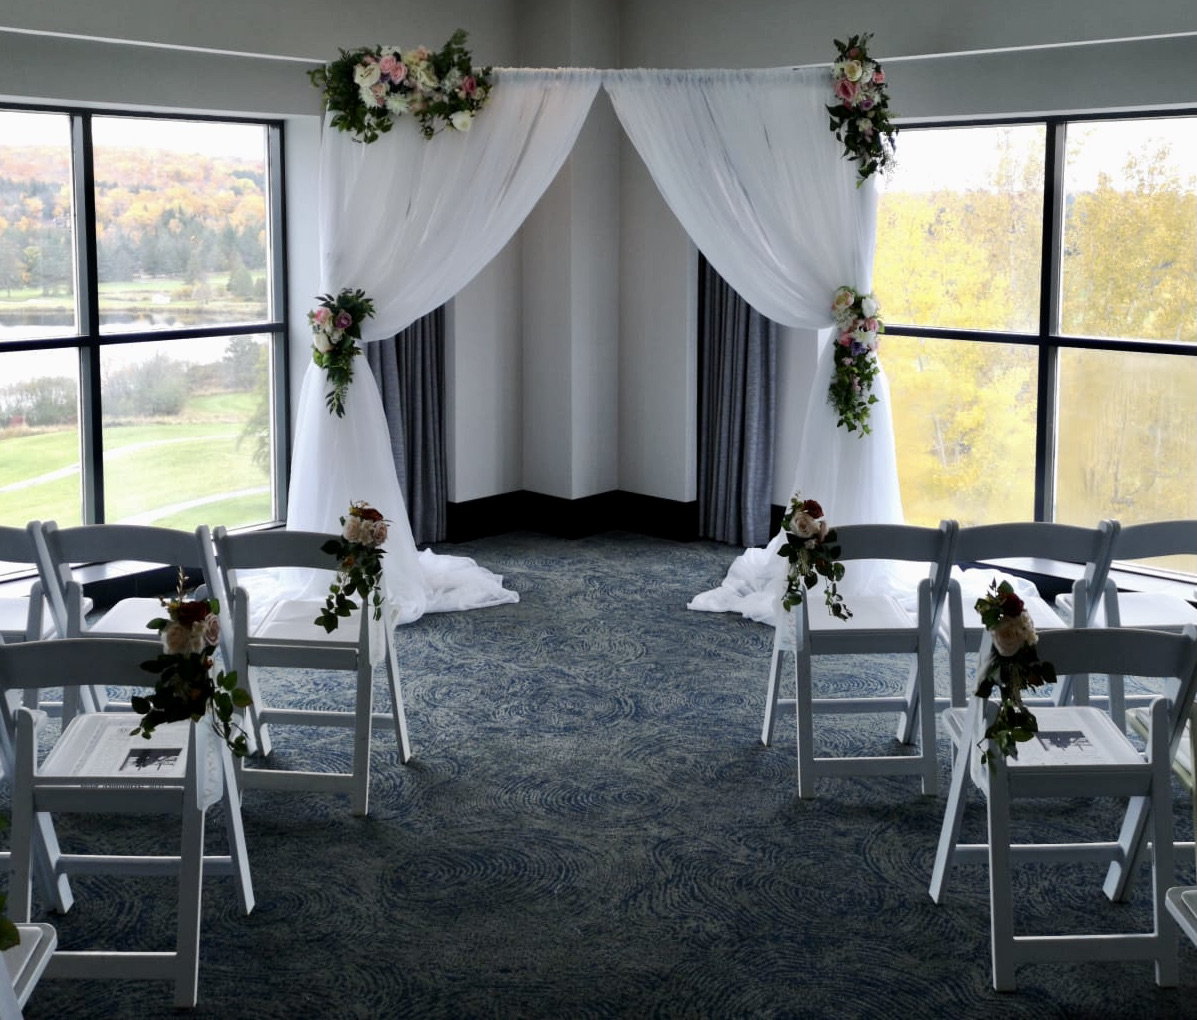 kitchener flower arches with drapes